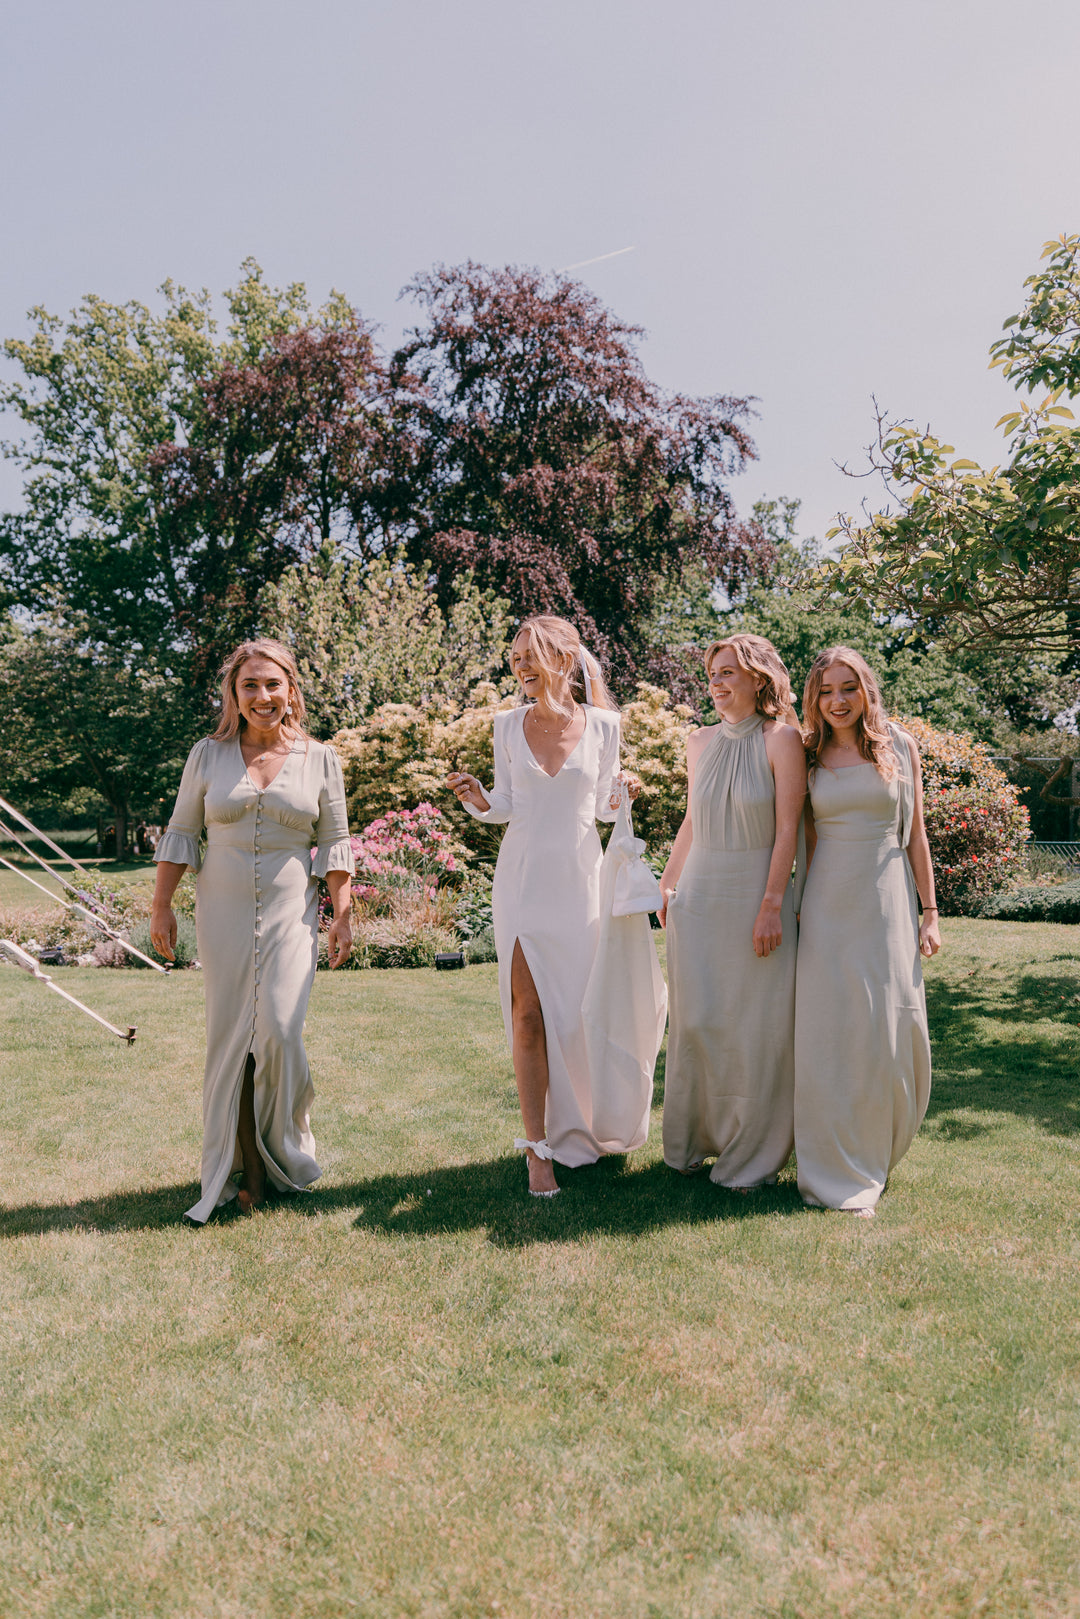 Be effortlessly stylish at any event in this Daphne Sage Green Bridesmaid Dress